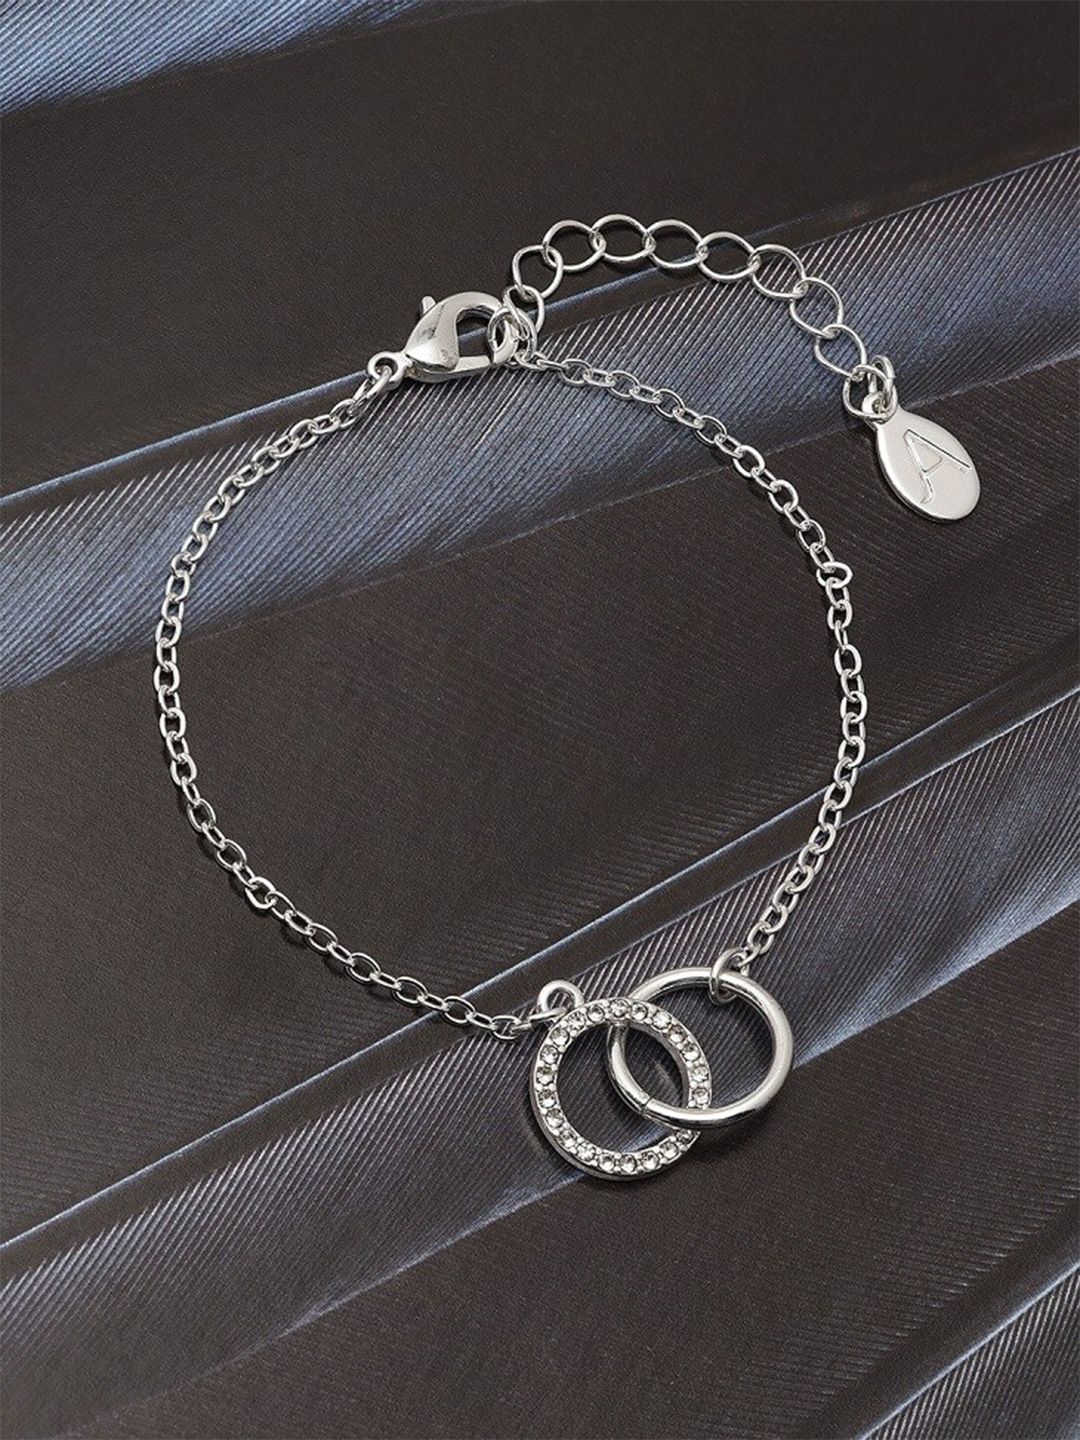 Accessorize London Women's Silver Pave Circle Bracelet Price in India